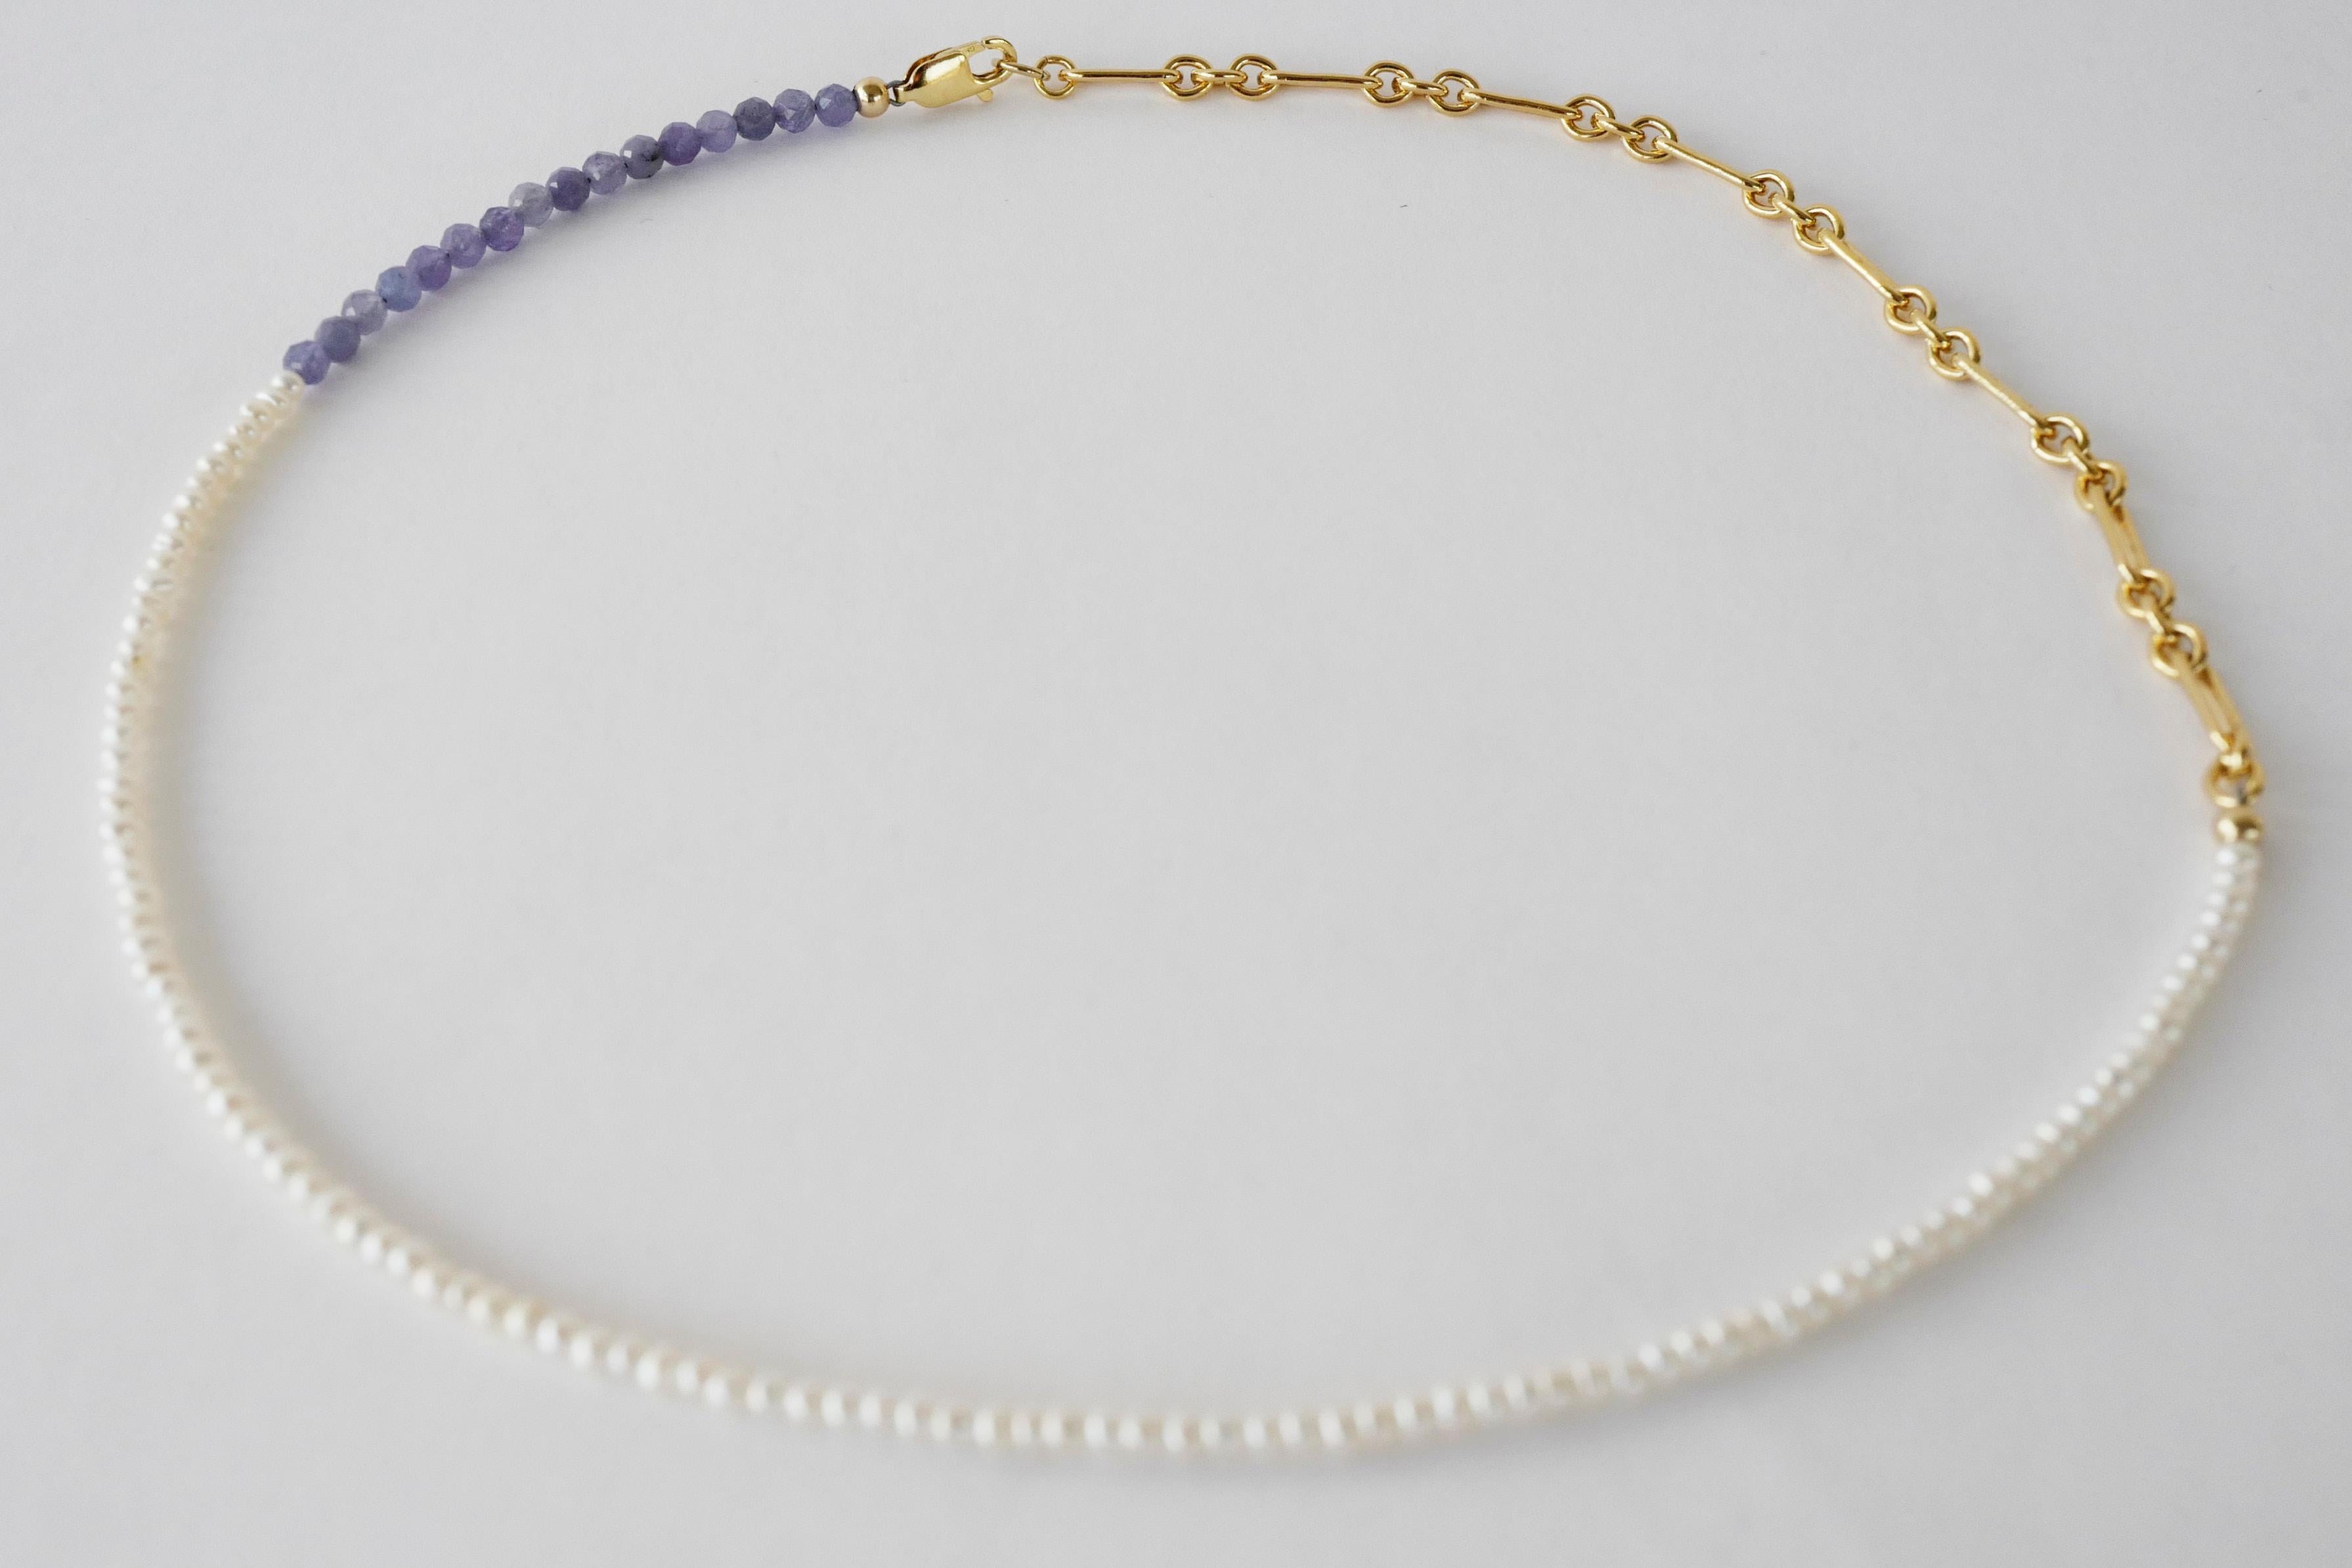 Round Cut White Pearl Necklace Tanzanite Gold Filled Chain Bead Choker J Dauphin